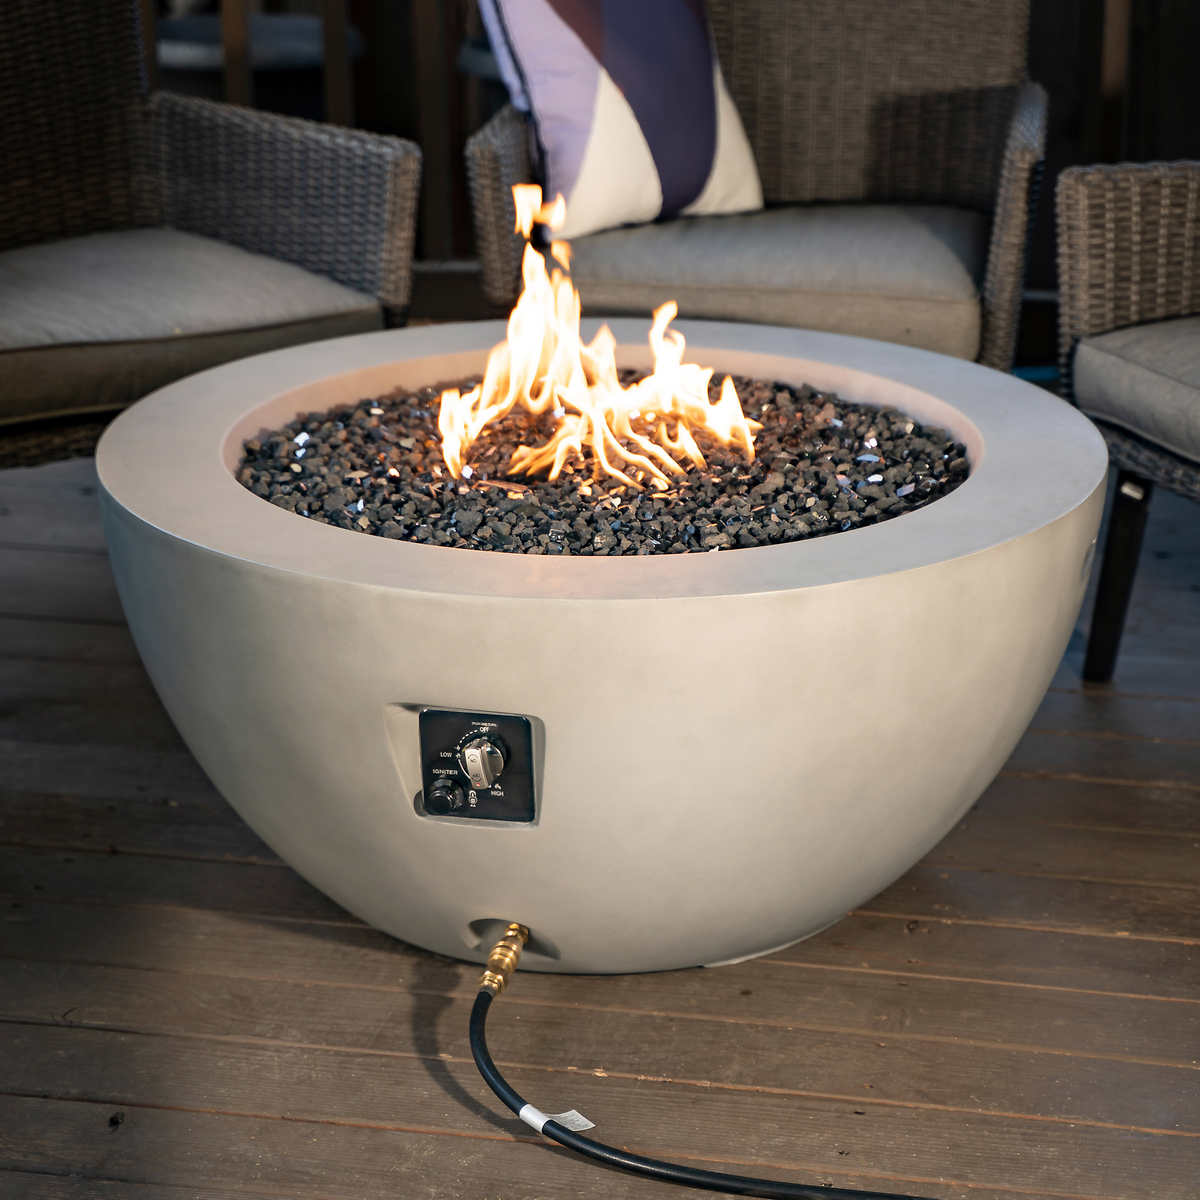 Faux Concrete Gas Fire Pit Costco, How To Build A Gas Fire Pit Coffee Table